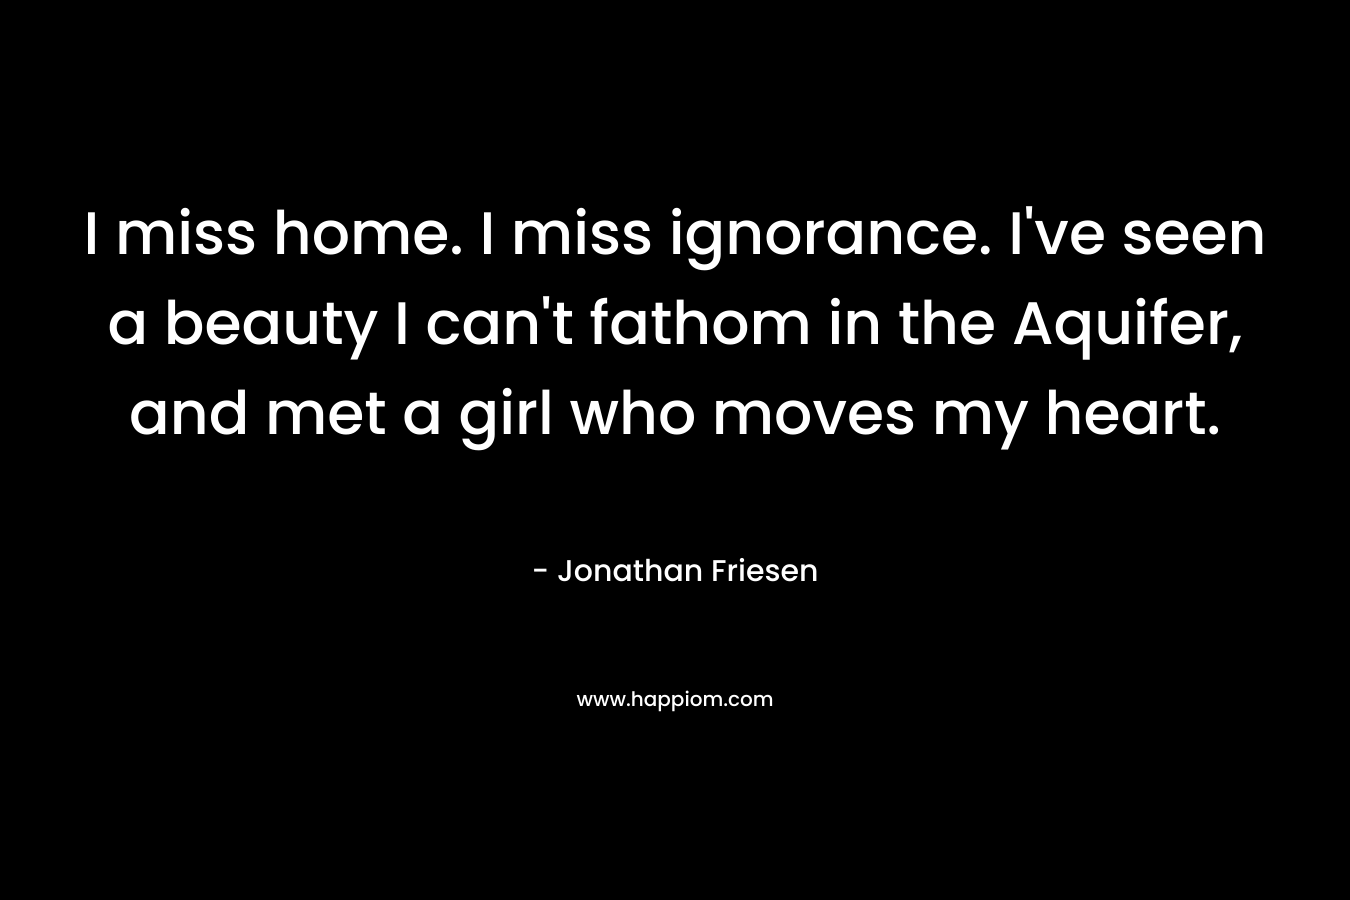 I miss home. I miss ignorance. I’ve seen a beauty I can’t fathom in the Aquifer, and met a girl who moves my heart. – Jonathan Friesen